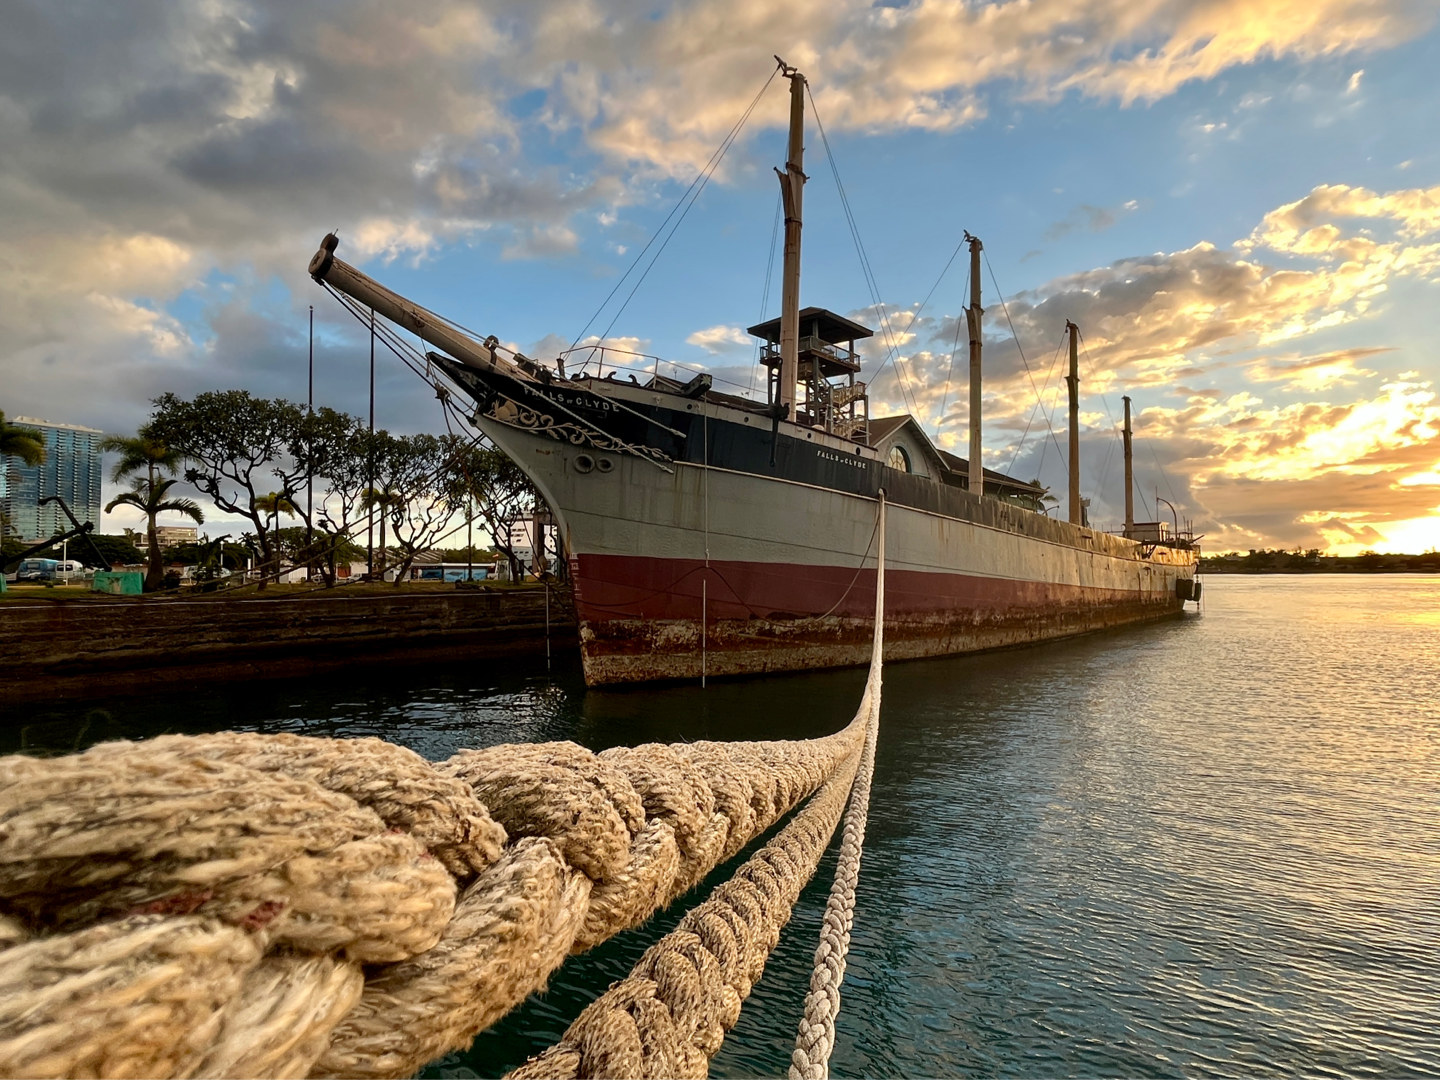 View of Oil Ship Falls of Clyde in Honolulu harbor at sunset